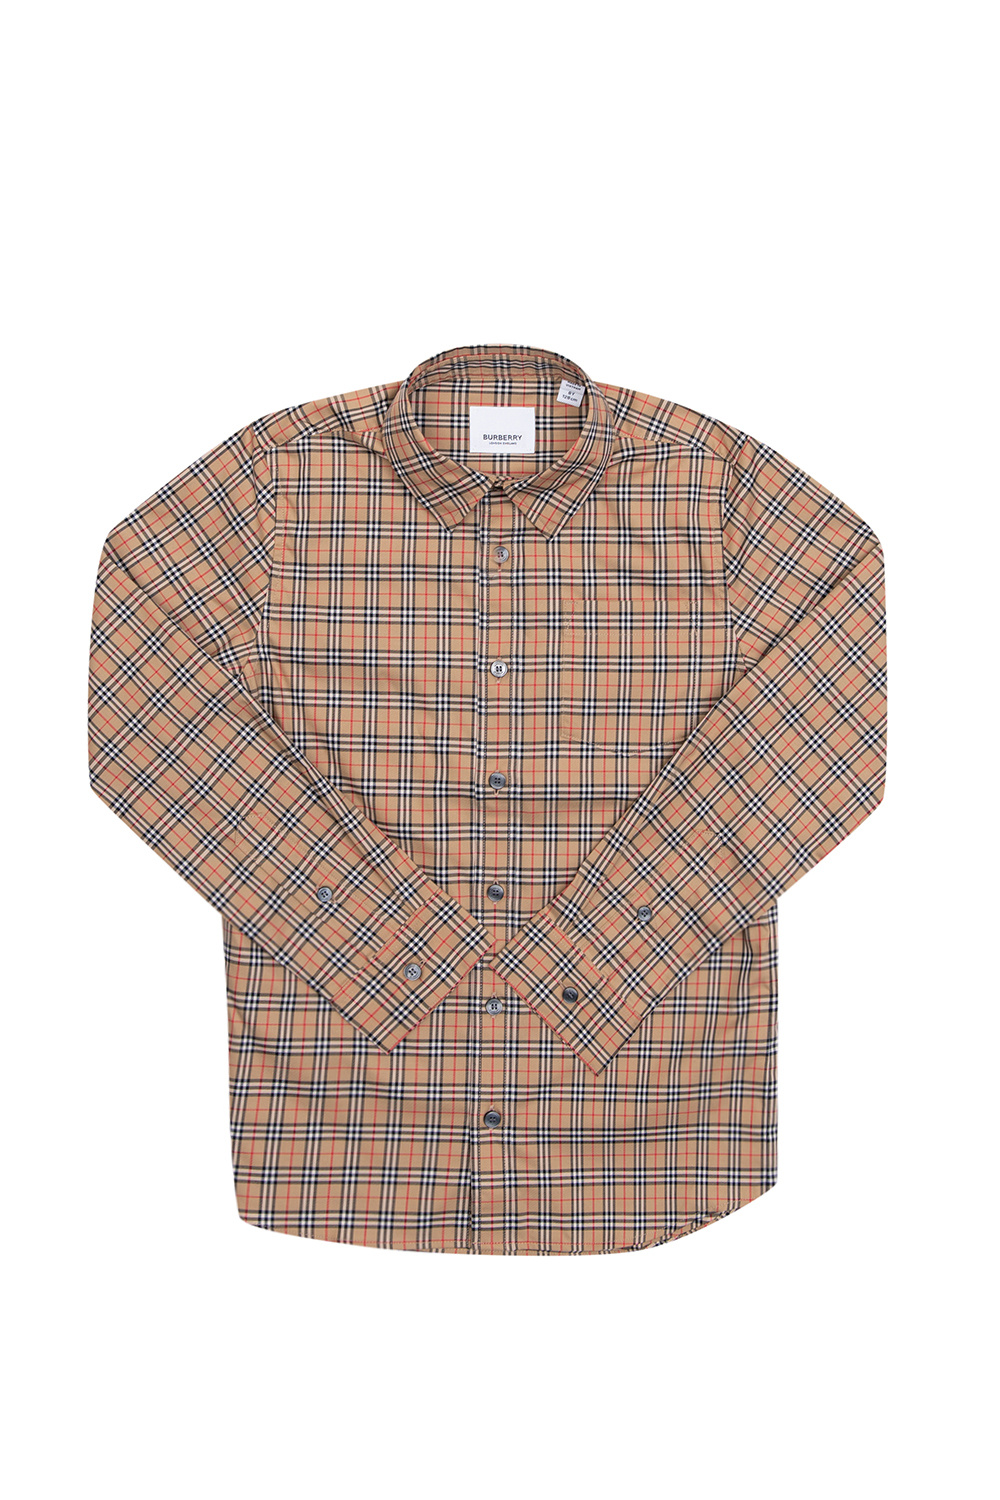 burberry hooded Kids Checked shirt